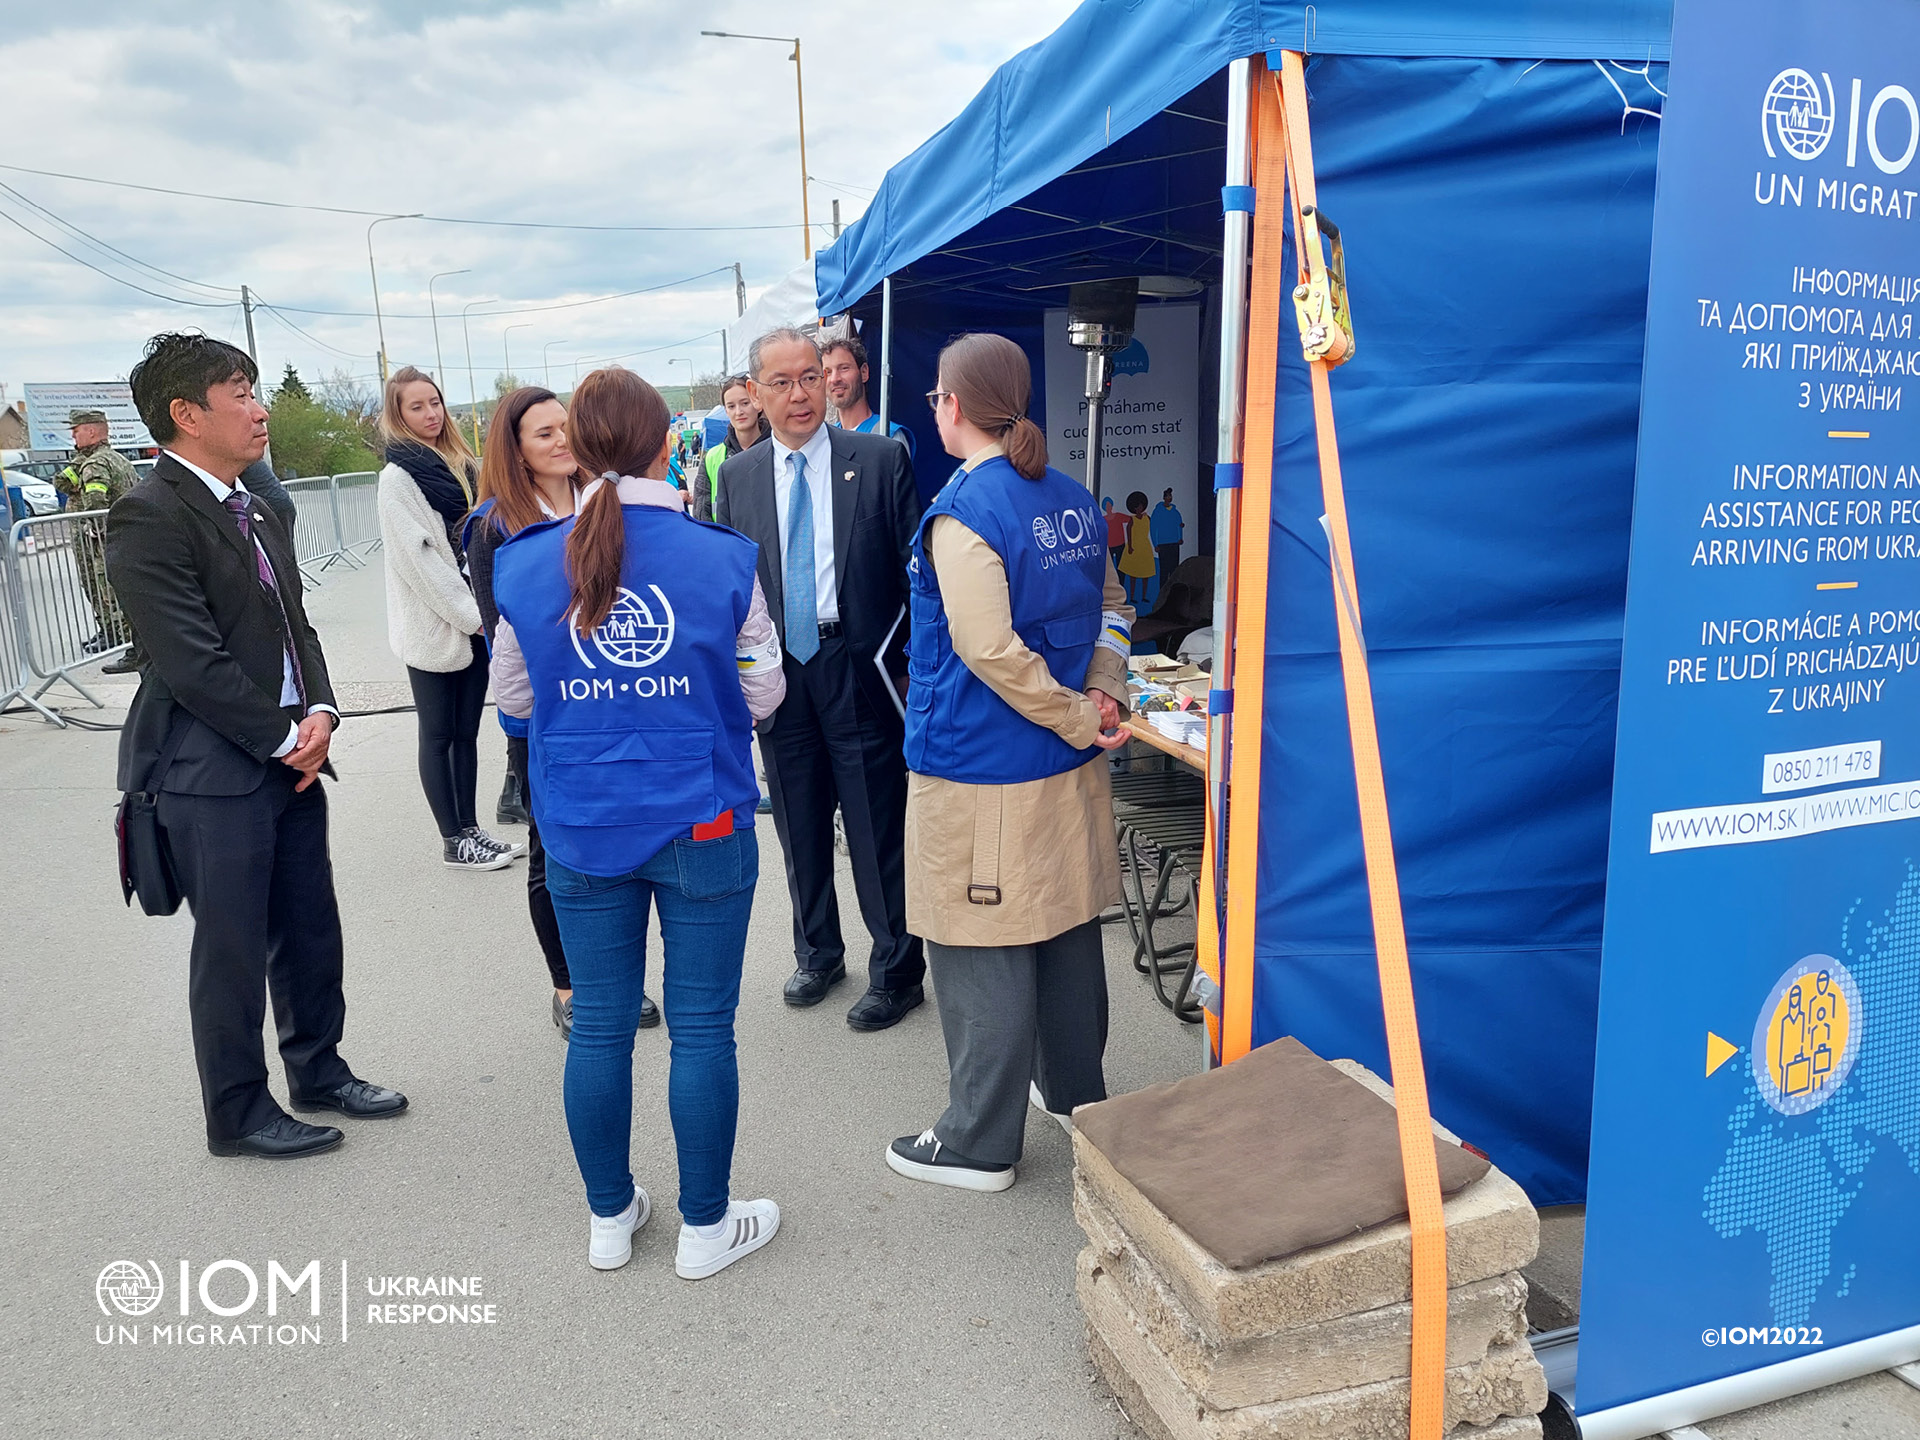 HE Makoto Nakagawa speaking with IOM staff at the Vyšné Nemecké Border Point of Entry. Photo © International Organization for Migration (IOM) 2022.